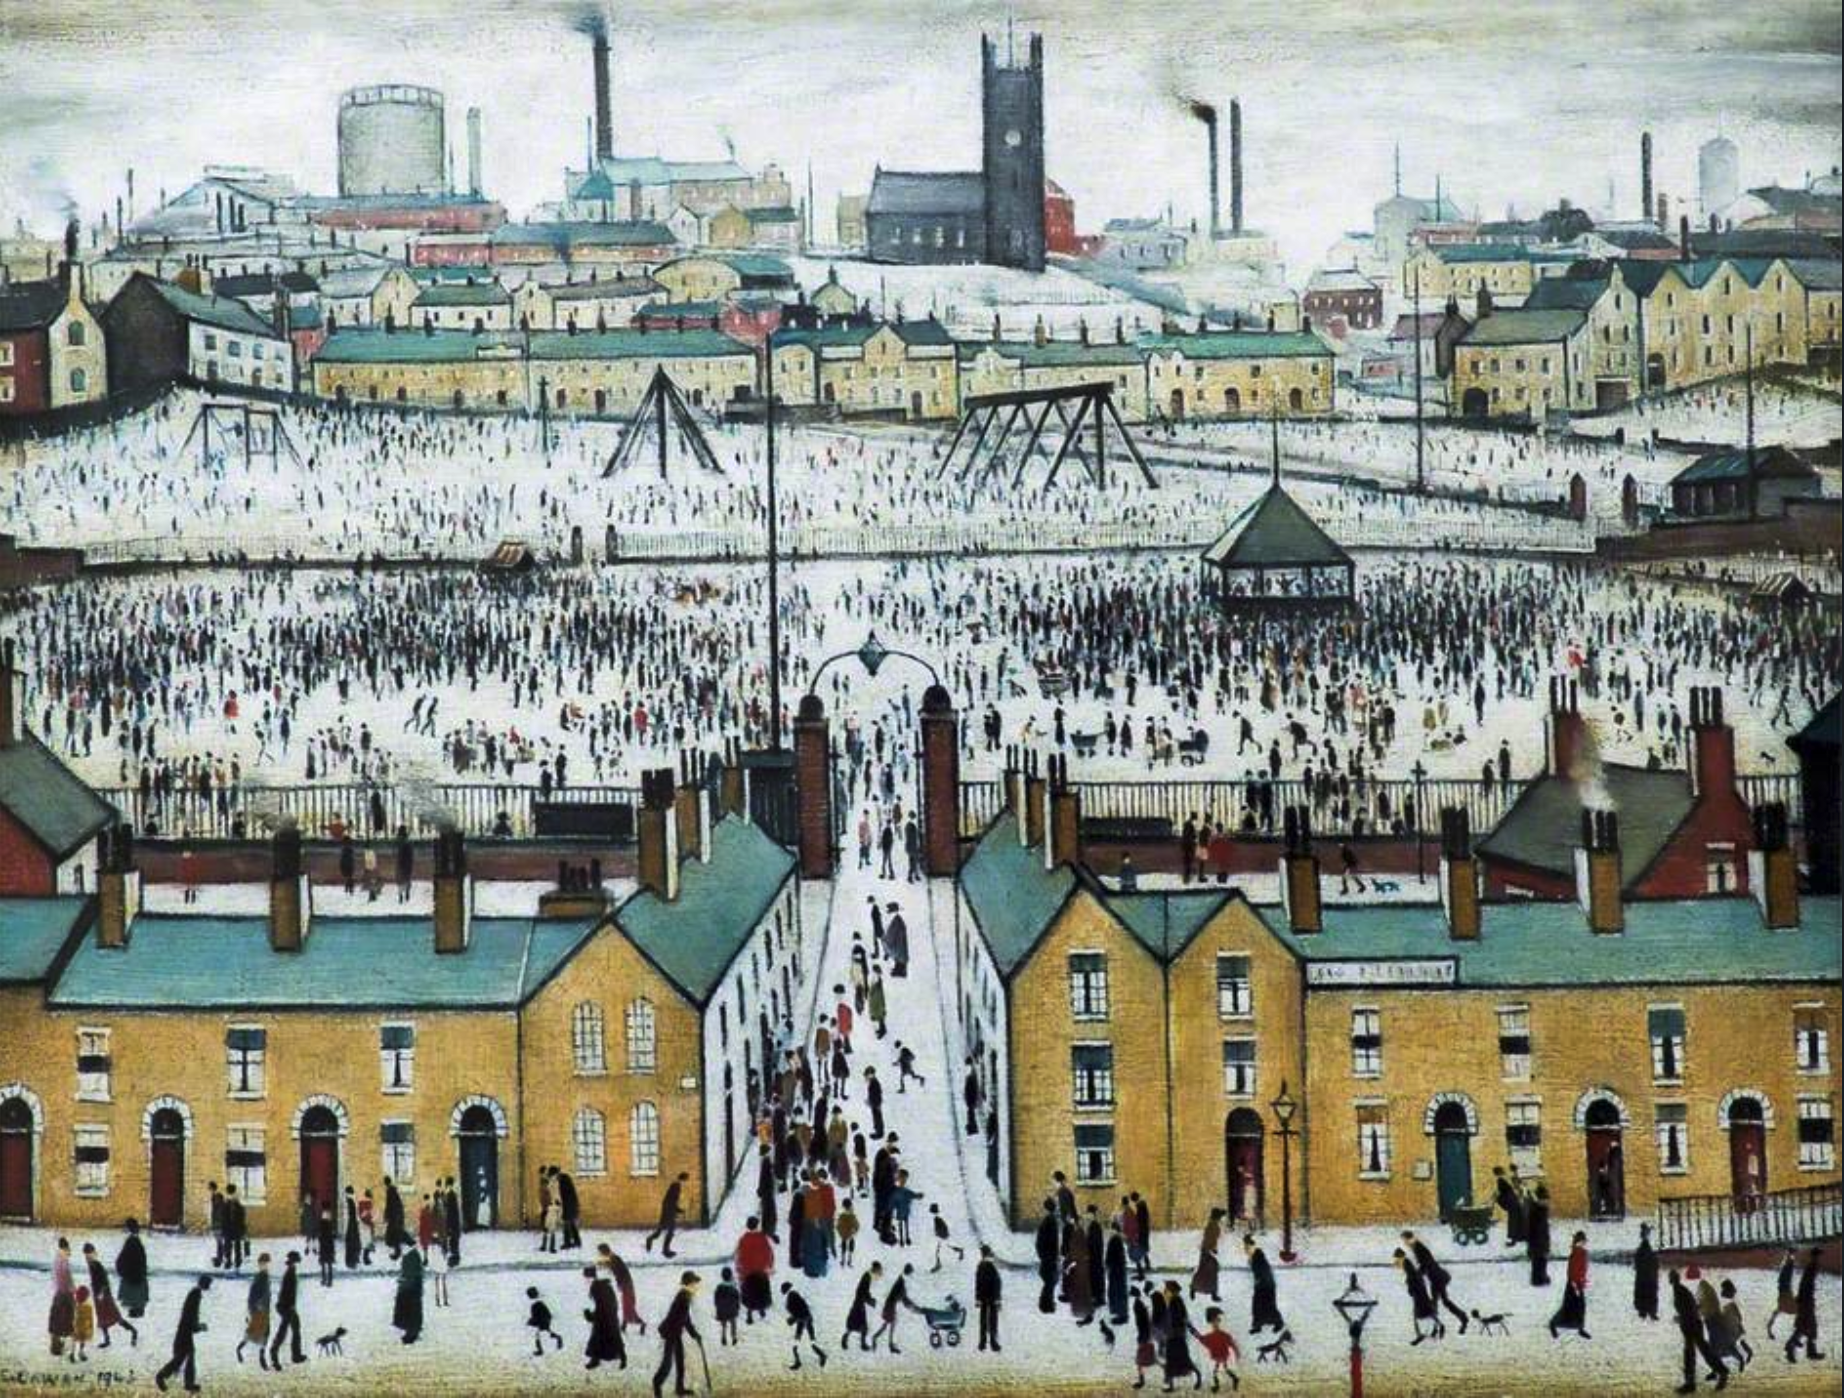 Britain at Play (1943) by Laurence Stephen Lowry (1887 - 1976), English artist.